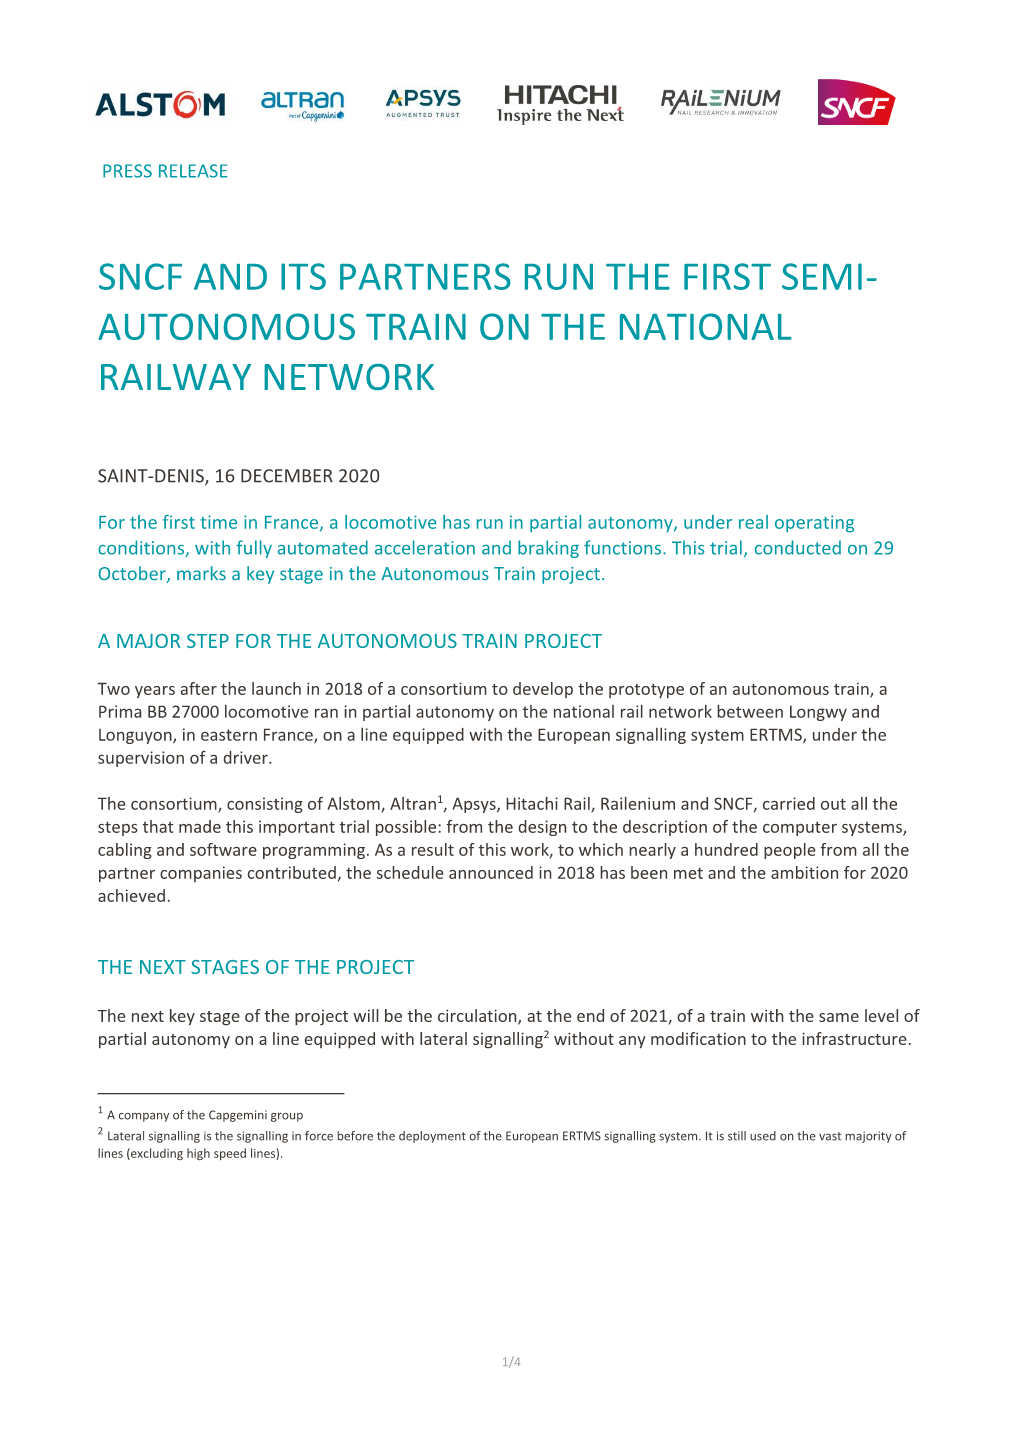 Sncf and Its Partners Run the First Semi- Autonomous Train on the National Railway Network